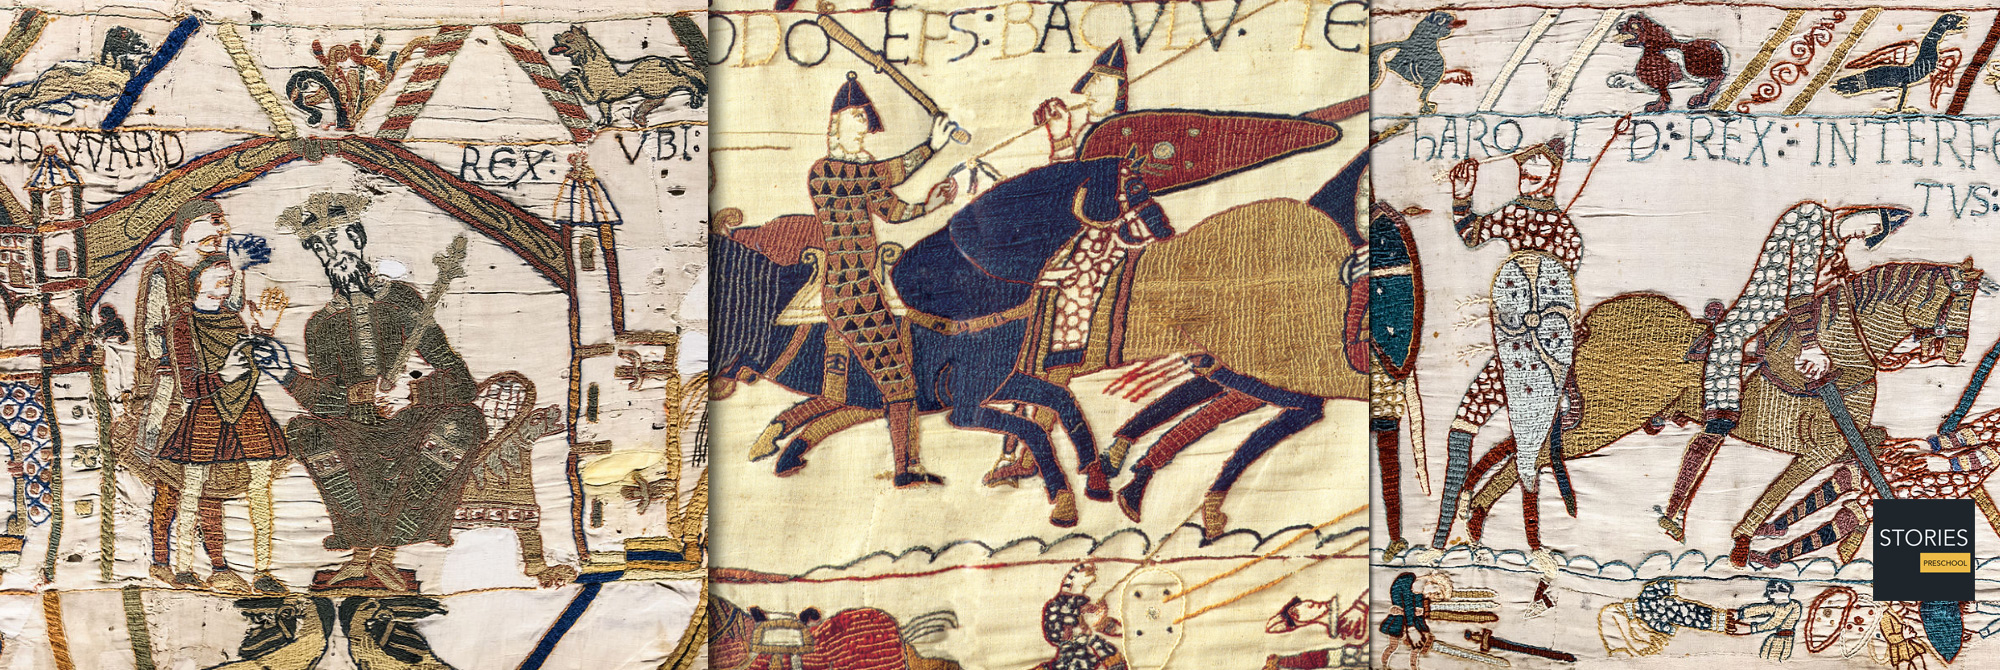 The Battle of Hastings was fought on 14 October 1066 between the Norman-French army of William, the Duke of Normandy, and an English army under the Anglo-Saxon King Harold Godwinson, beginning the Norman conquest of England | Stories Preschool